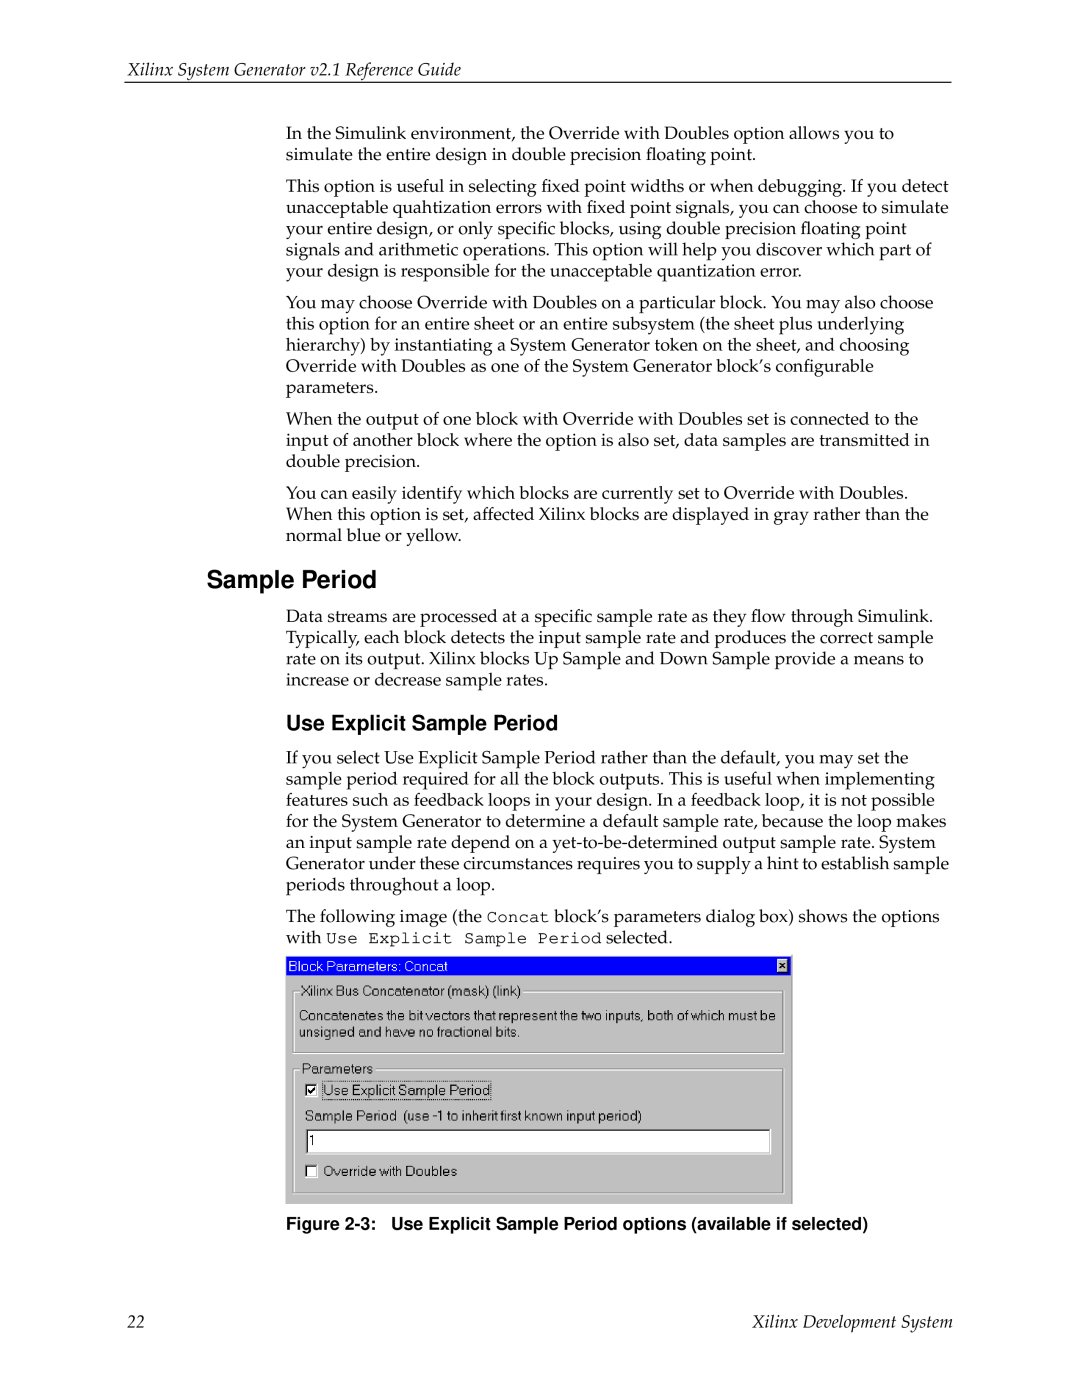 Xilinx V2.1 manual Use Explicit Sample Period, Xilinx System Generator v2.1 Reference Guide, Xilinx Development System 